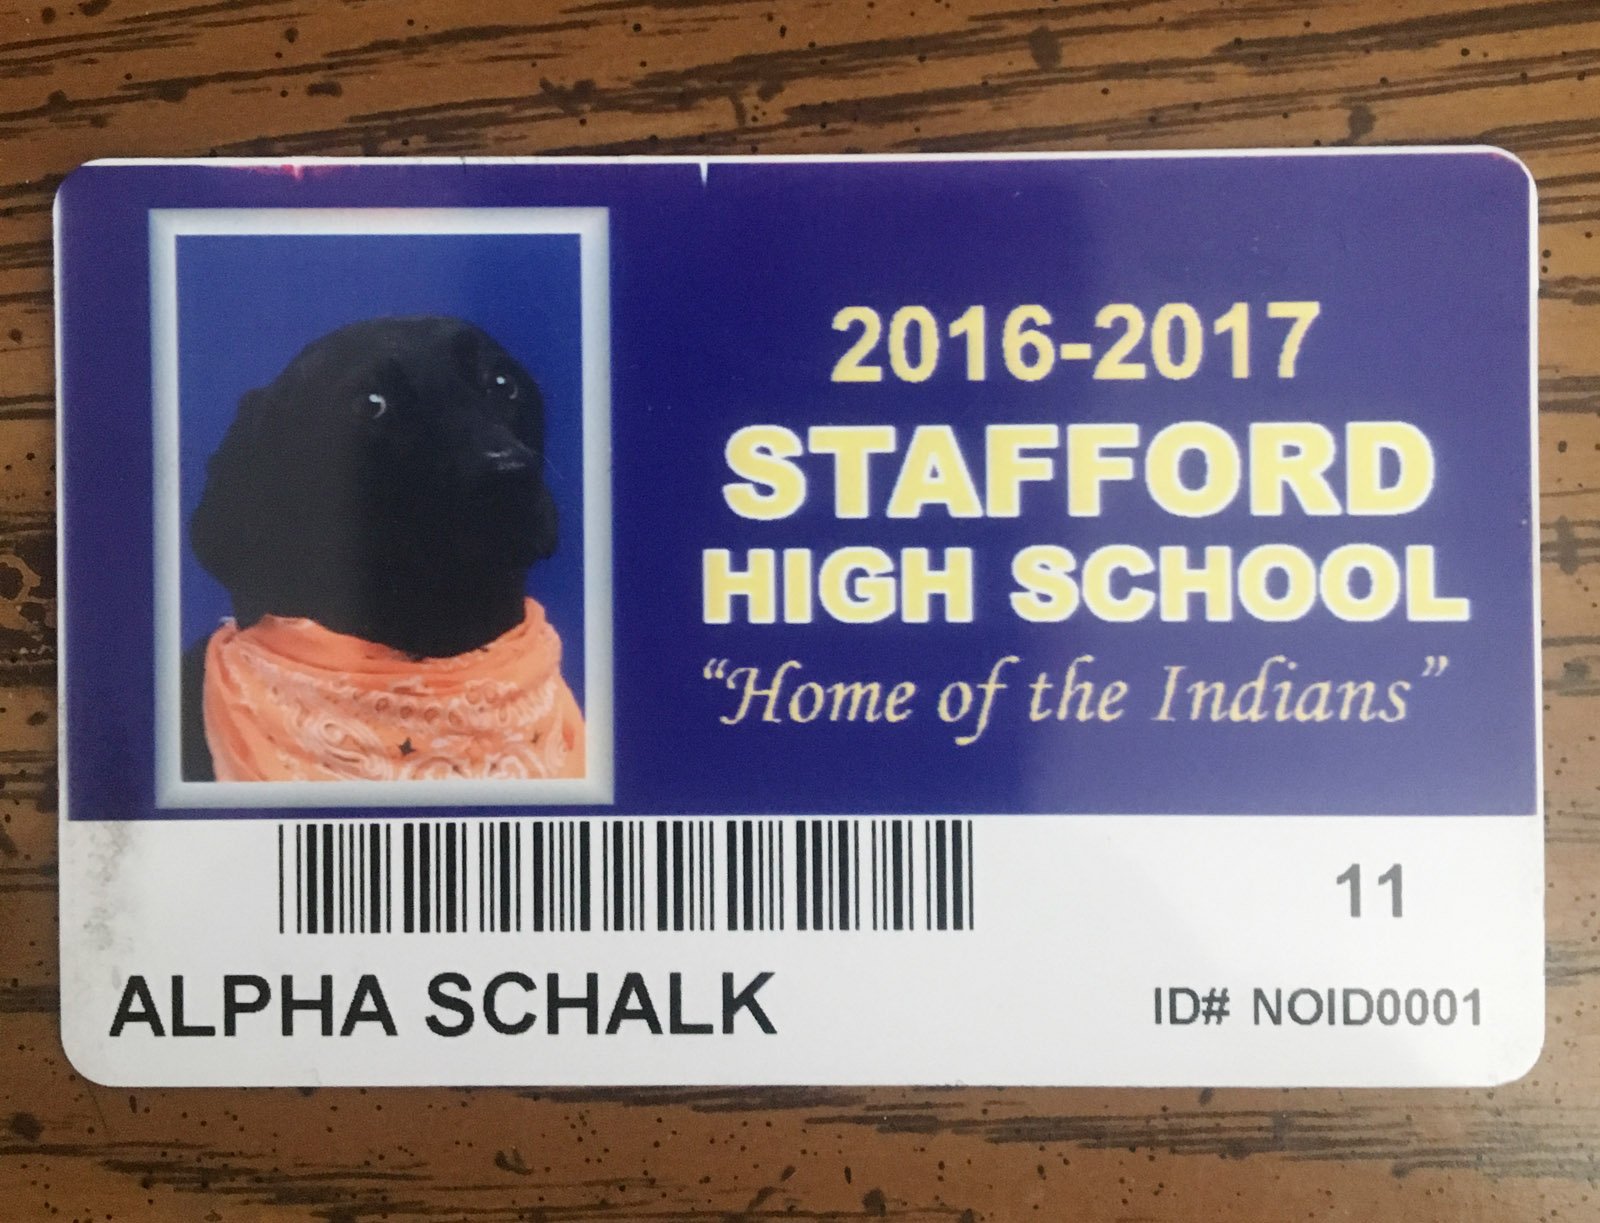 This photo provided by A.J. Schalk shows the student ID for his service dog Alpha, who appeared among the junior class photos in the Stafford  High School yearbook. (Courtesy A.J. Schalk)